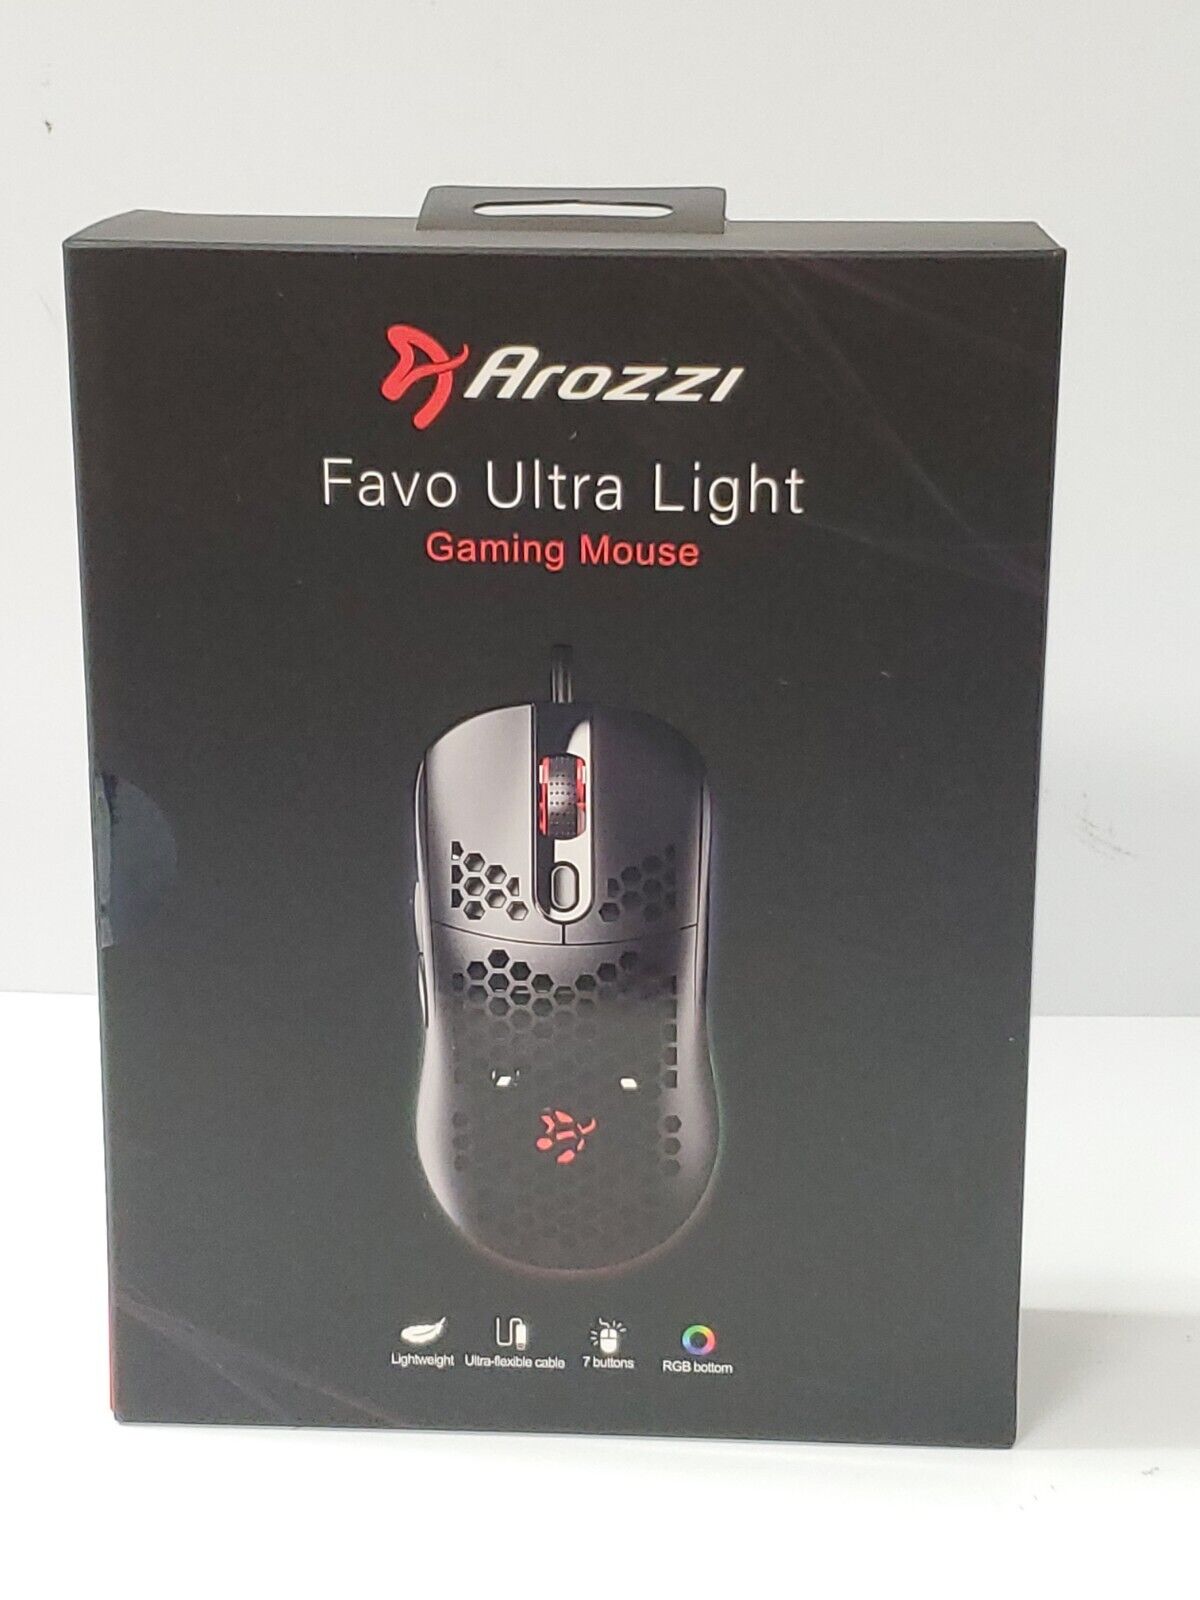 Arozzi Favo Ultra Lightweight RGB Gaming Mouse Honeycomb Design 7 Buttons NEW